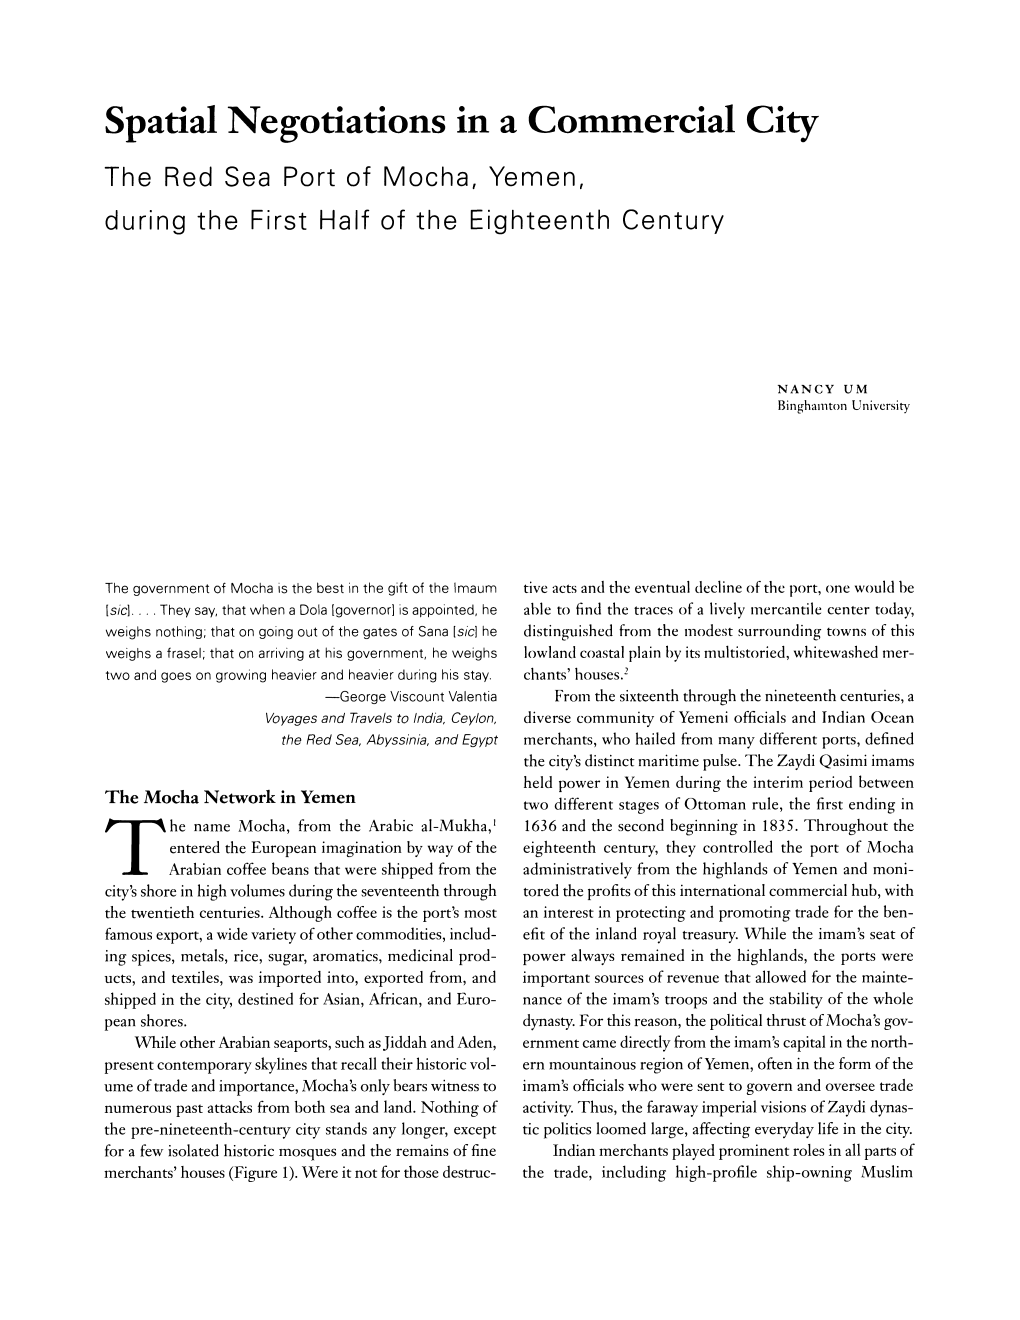 Spatial Negotiations in a Commercial City the Red Sea Port of Mocha, Yemen, During the First Half of the Eighteenth Century